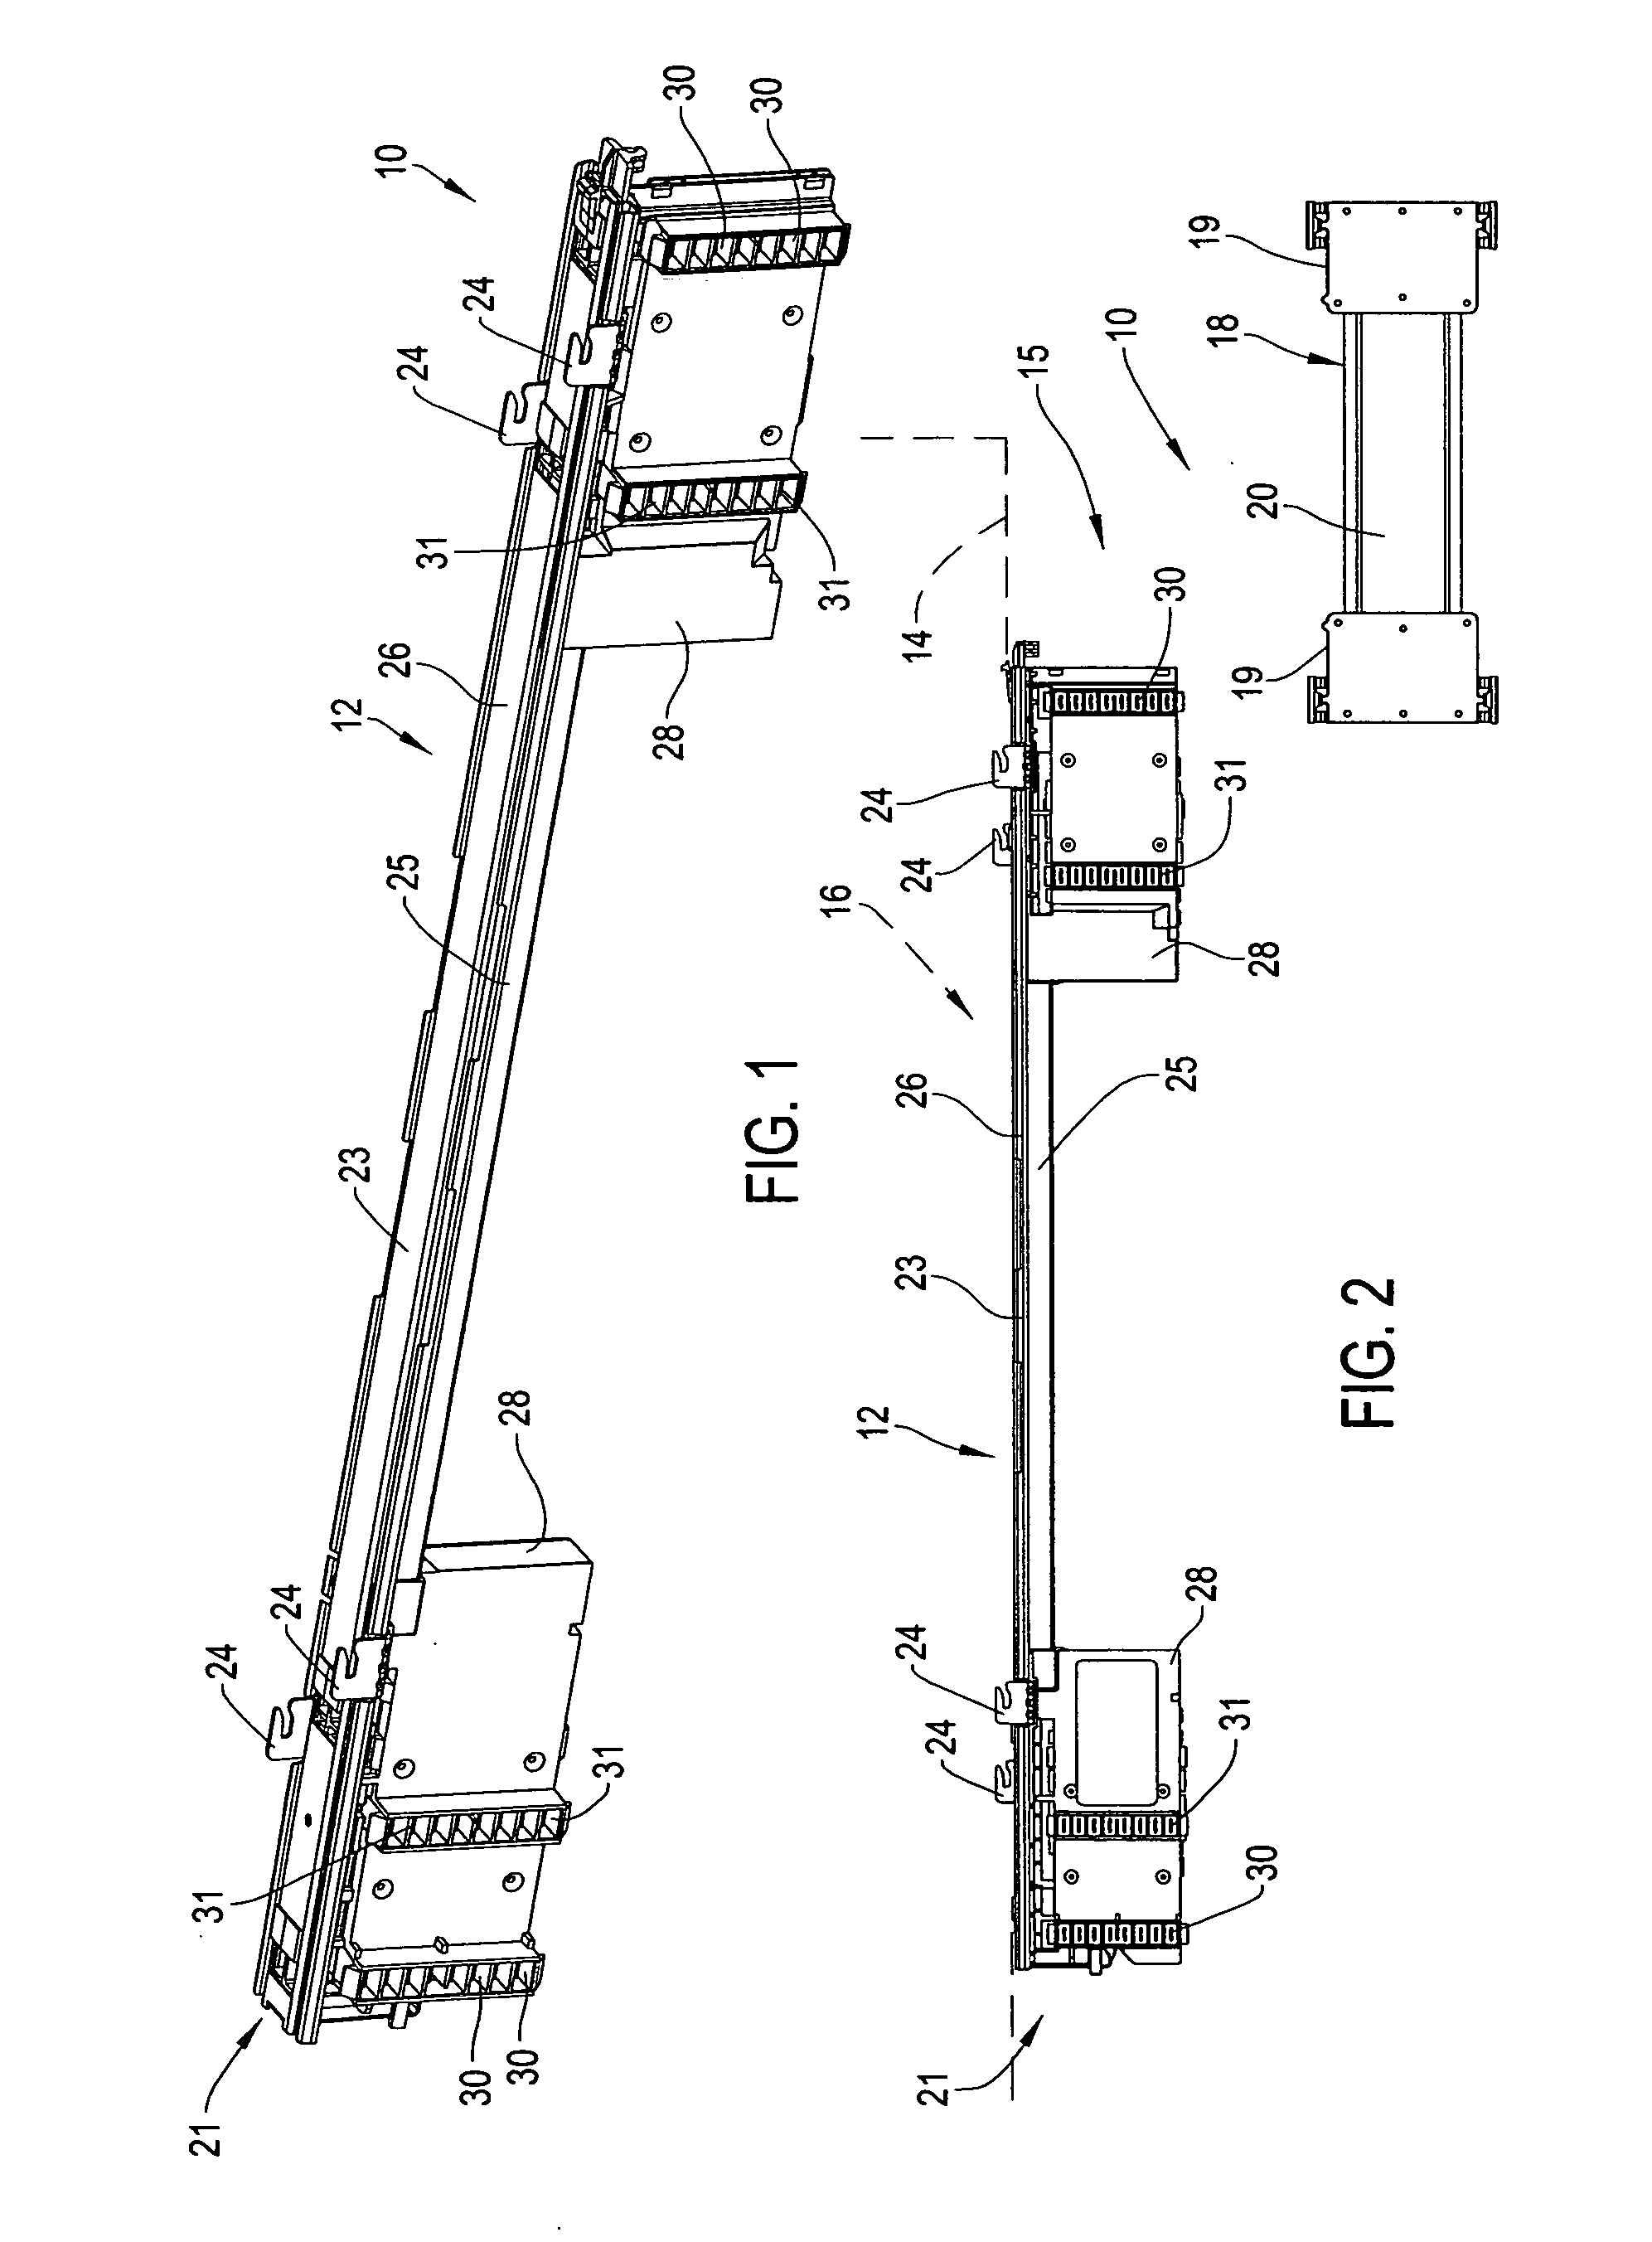 Flex connector and manufacturing process